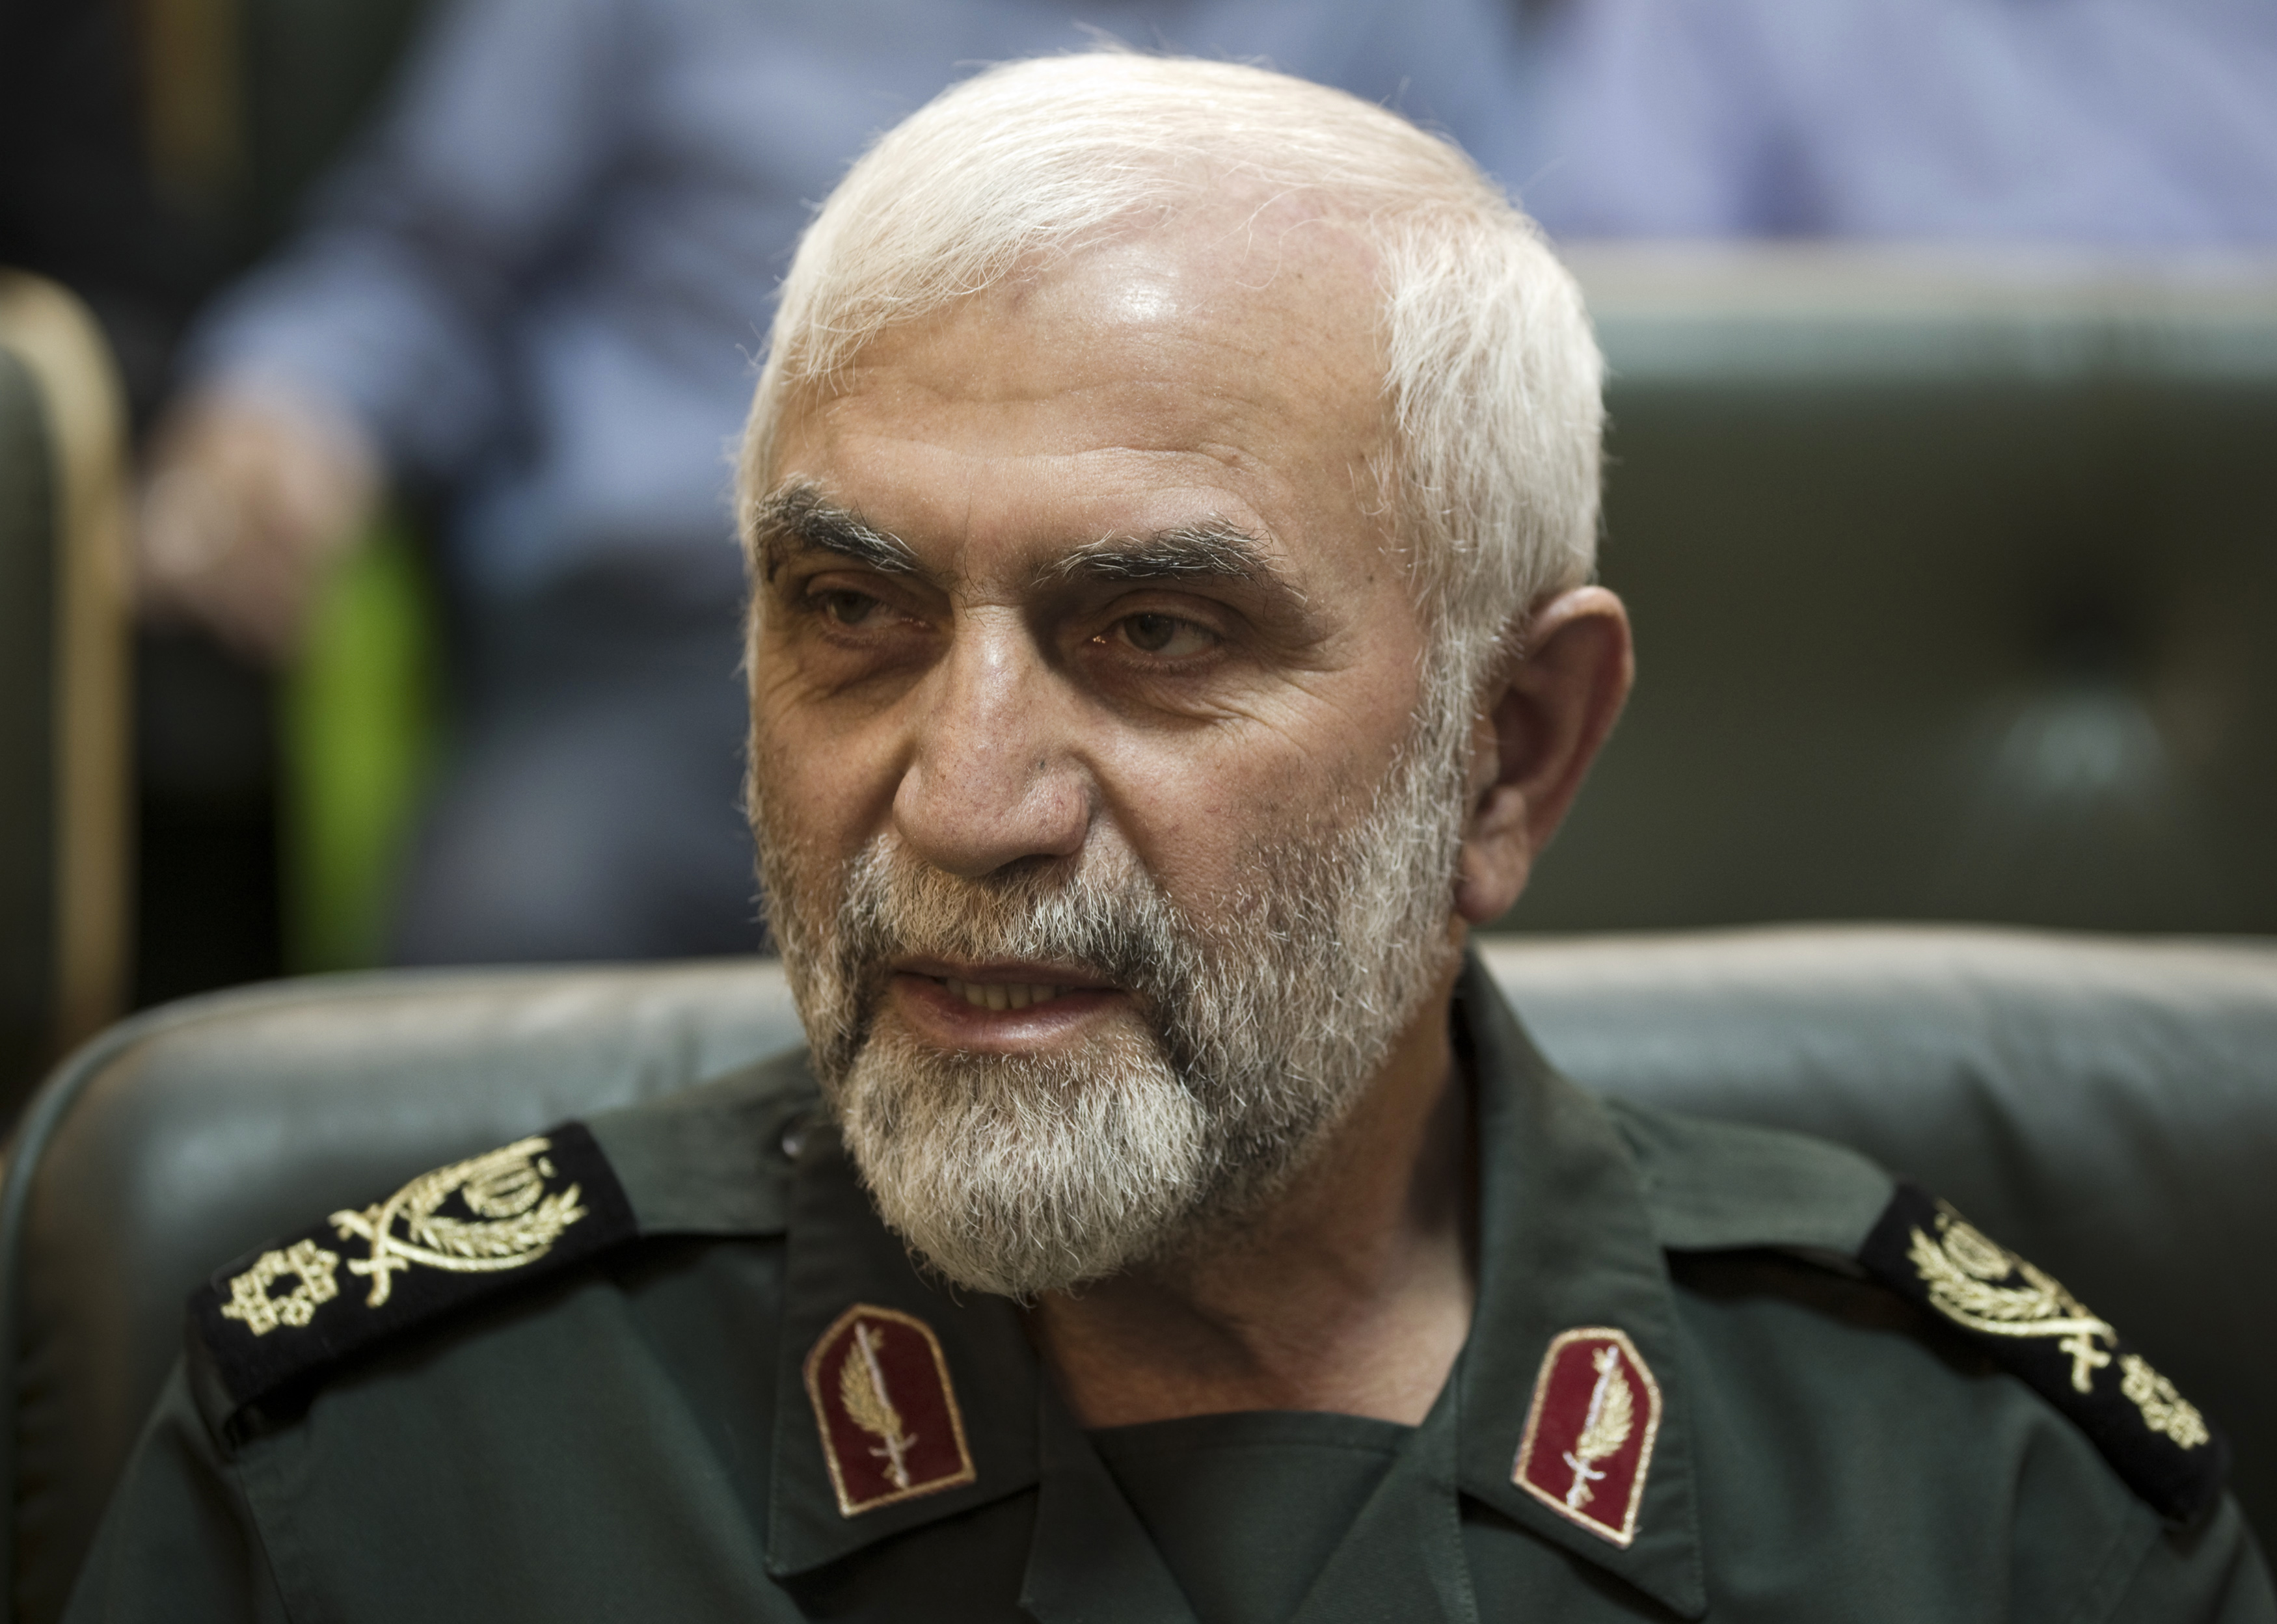 Head of the Mohammad Rasulallah Revolutionary guard base, Hossein Hamedani, attends a conference to mark the martyrs of terrorism in Tehran on Sept. 6, 2011. (Morteza Nikoubaz—Reuters)